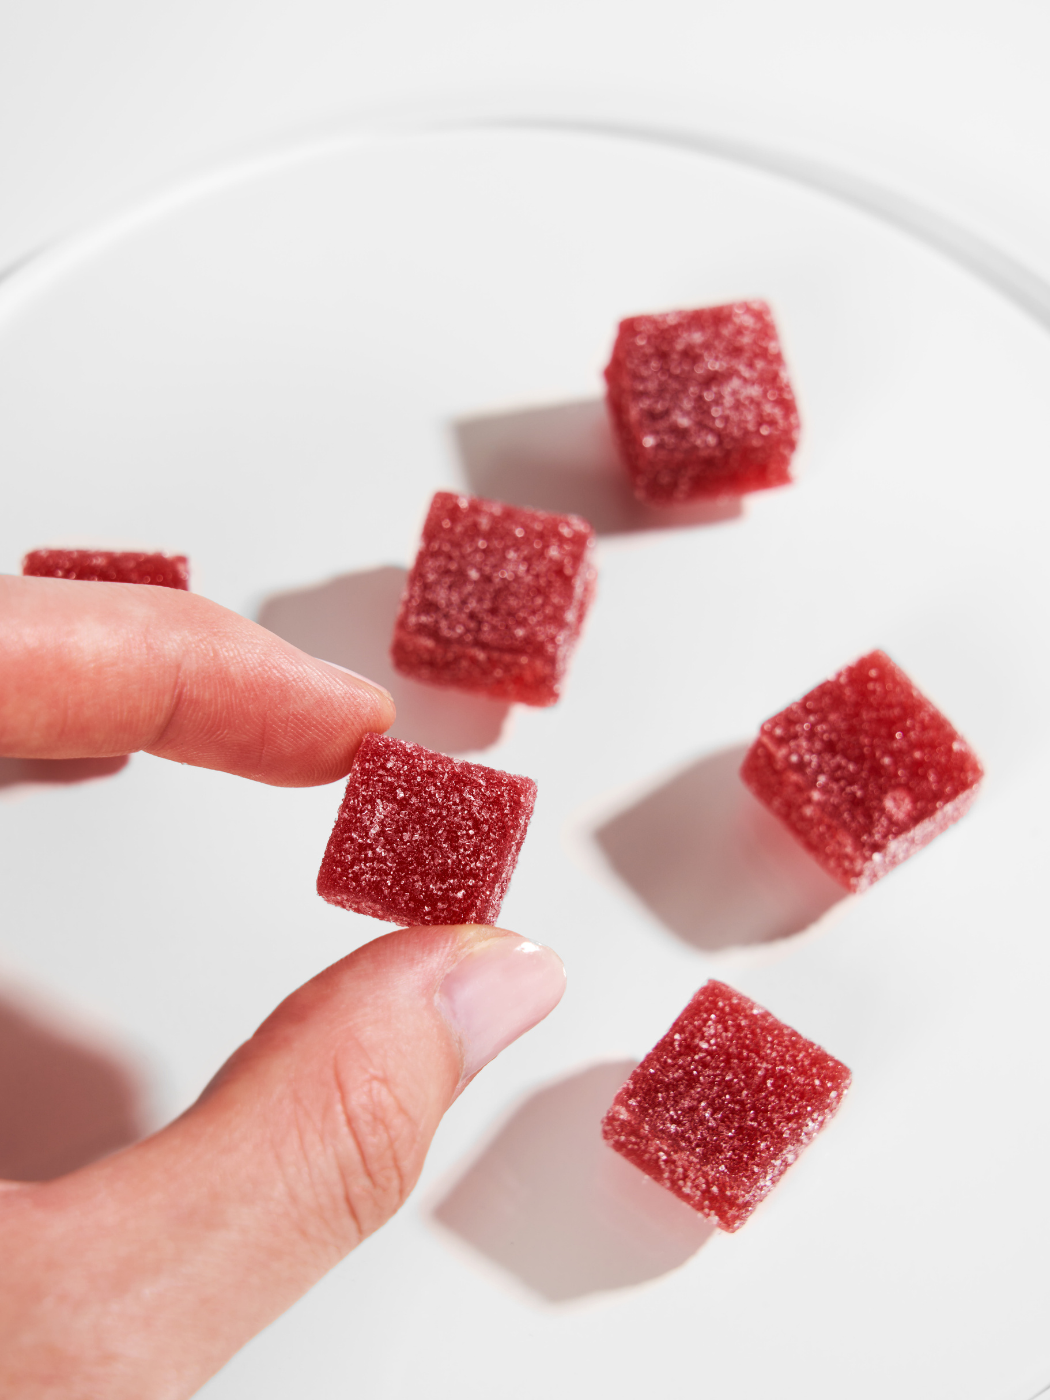 How to Choose The Right Gummy